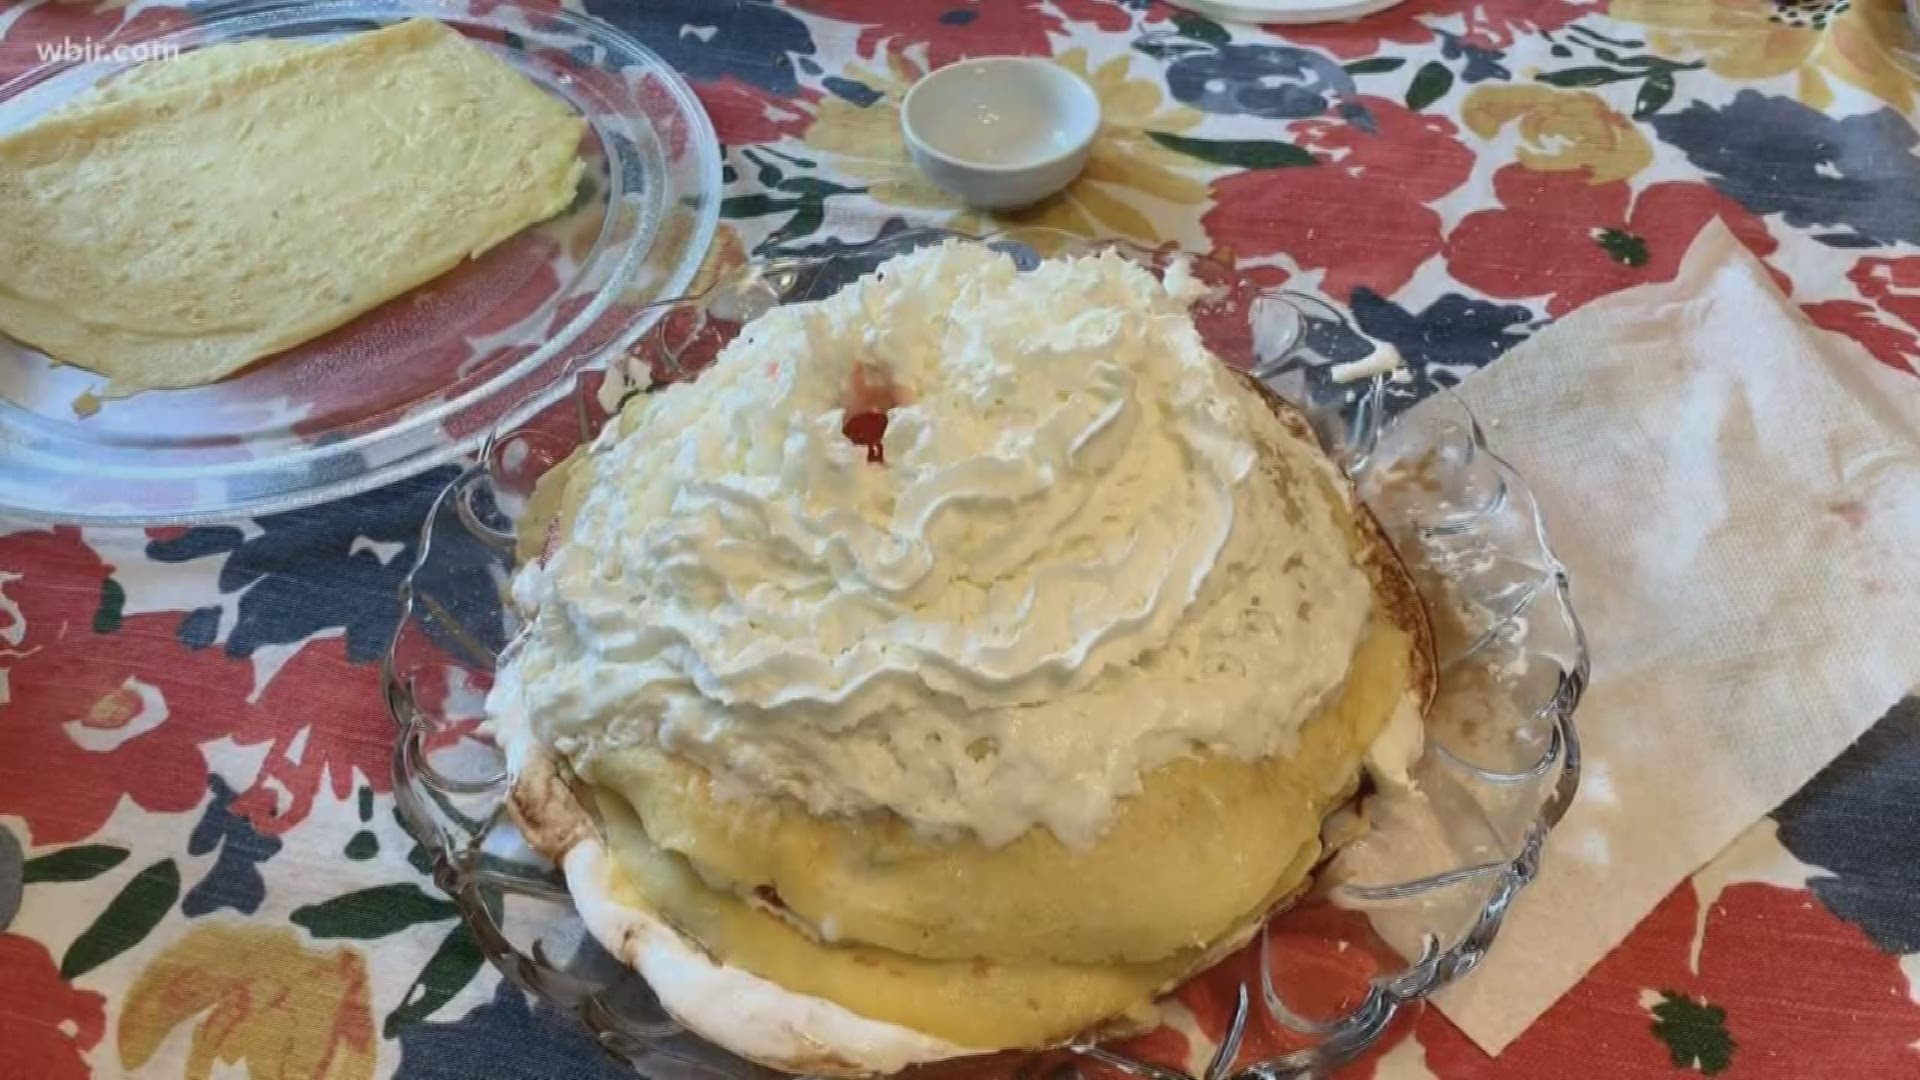 Jay Bernard with Metro Pizza shared this great how-to video with his family for a crepe cake. March 23, 2020-4pm.